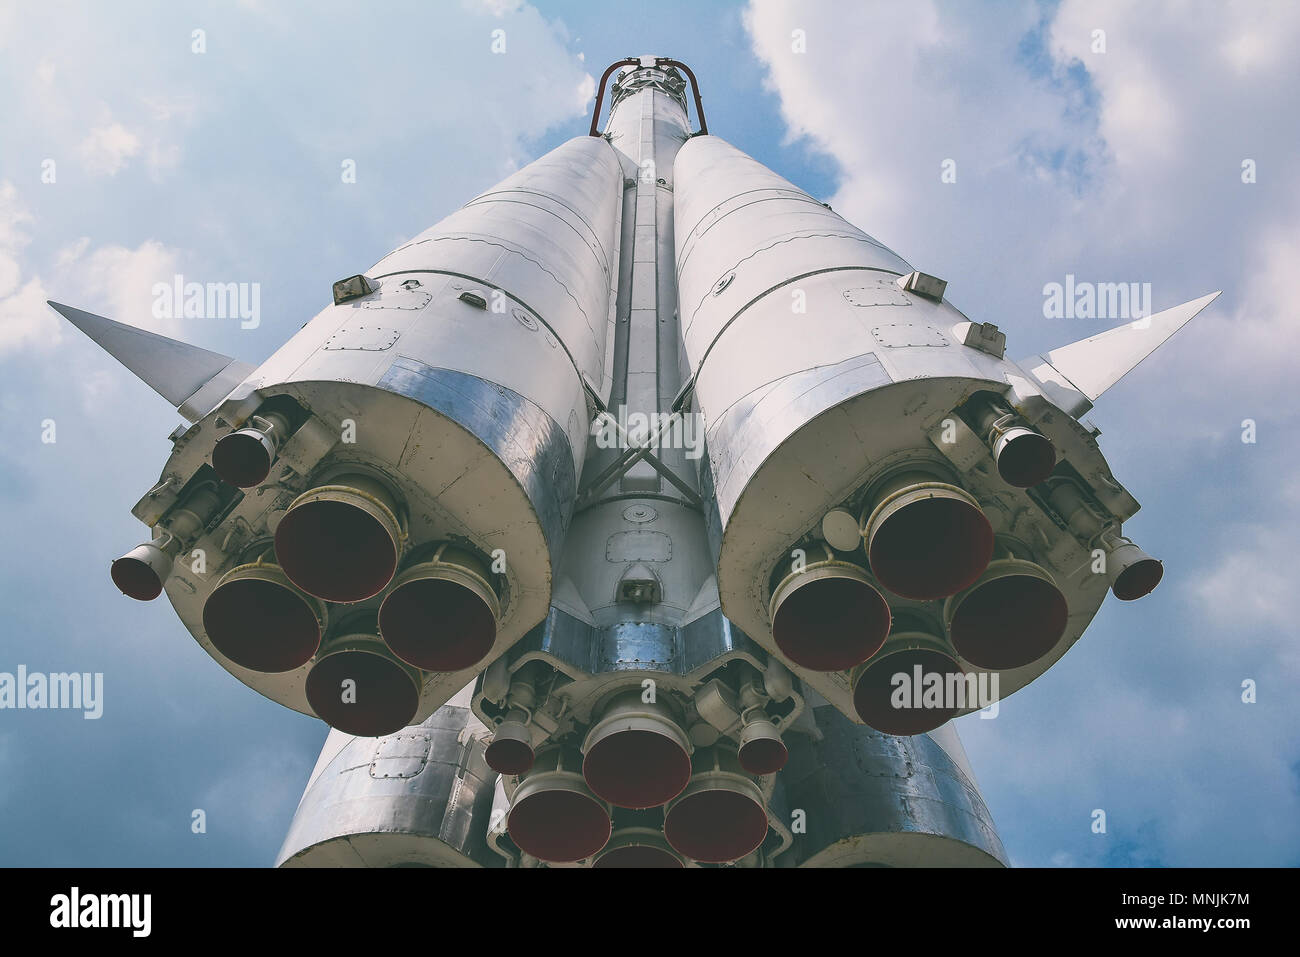 The world's first manned space rocket 'Vostok' at an exhibition in Moscow city, Russia Stock Photo